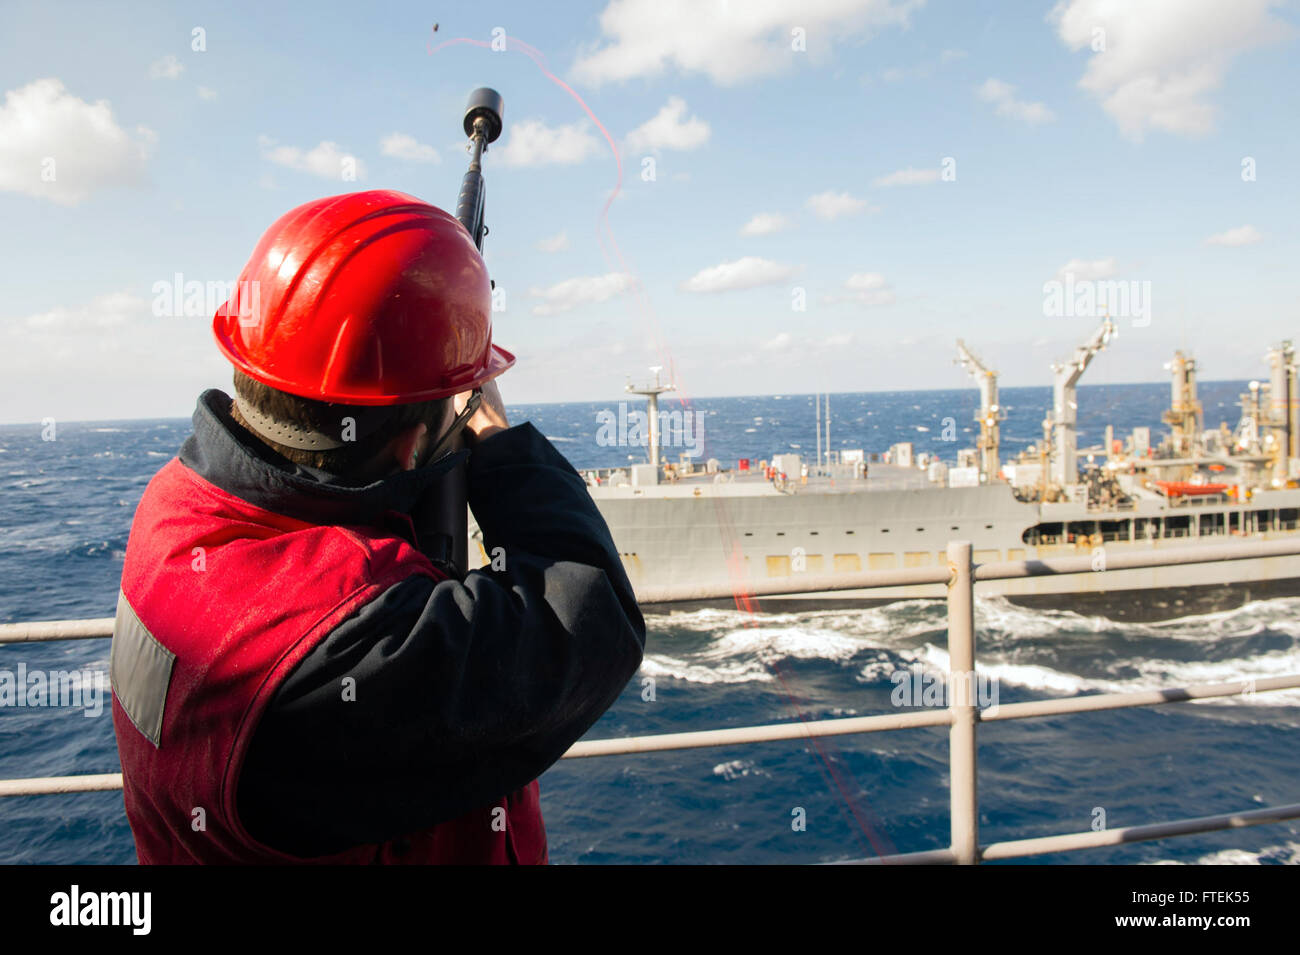 150108-N-KD168-059 MEDITERRANEAN SEA (Jan. 8, 2015) Gunner's Mate Seaman Shane Conroy, a Cheyenne, Wyoming native, fires a shot line from USS Iwo Jima (LHD 7) over to Military Sealift Command fleet replenishment oiler USNS Kanawha (T-AO-196) during a replenishment-at-sea, Jan. 8, 2015. Iwo Jima, a Wasp-class amphibious assault ship, deployed as part of the Iwo Jima Amphibious Readiness Group/24th Marine Expeditionary Unit, is conducting naval operations in the U.S. 6th Fleet area of operations in support of U.S. national security interests in Europe. (U.S. Navy photo by Mass Communication Spec Stock Photo